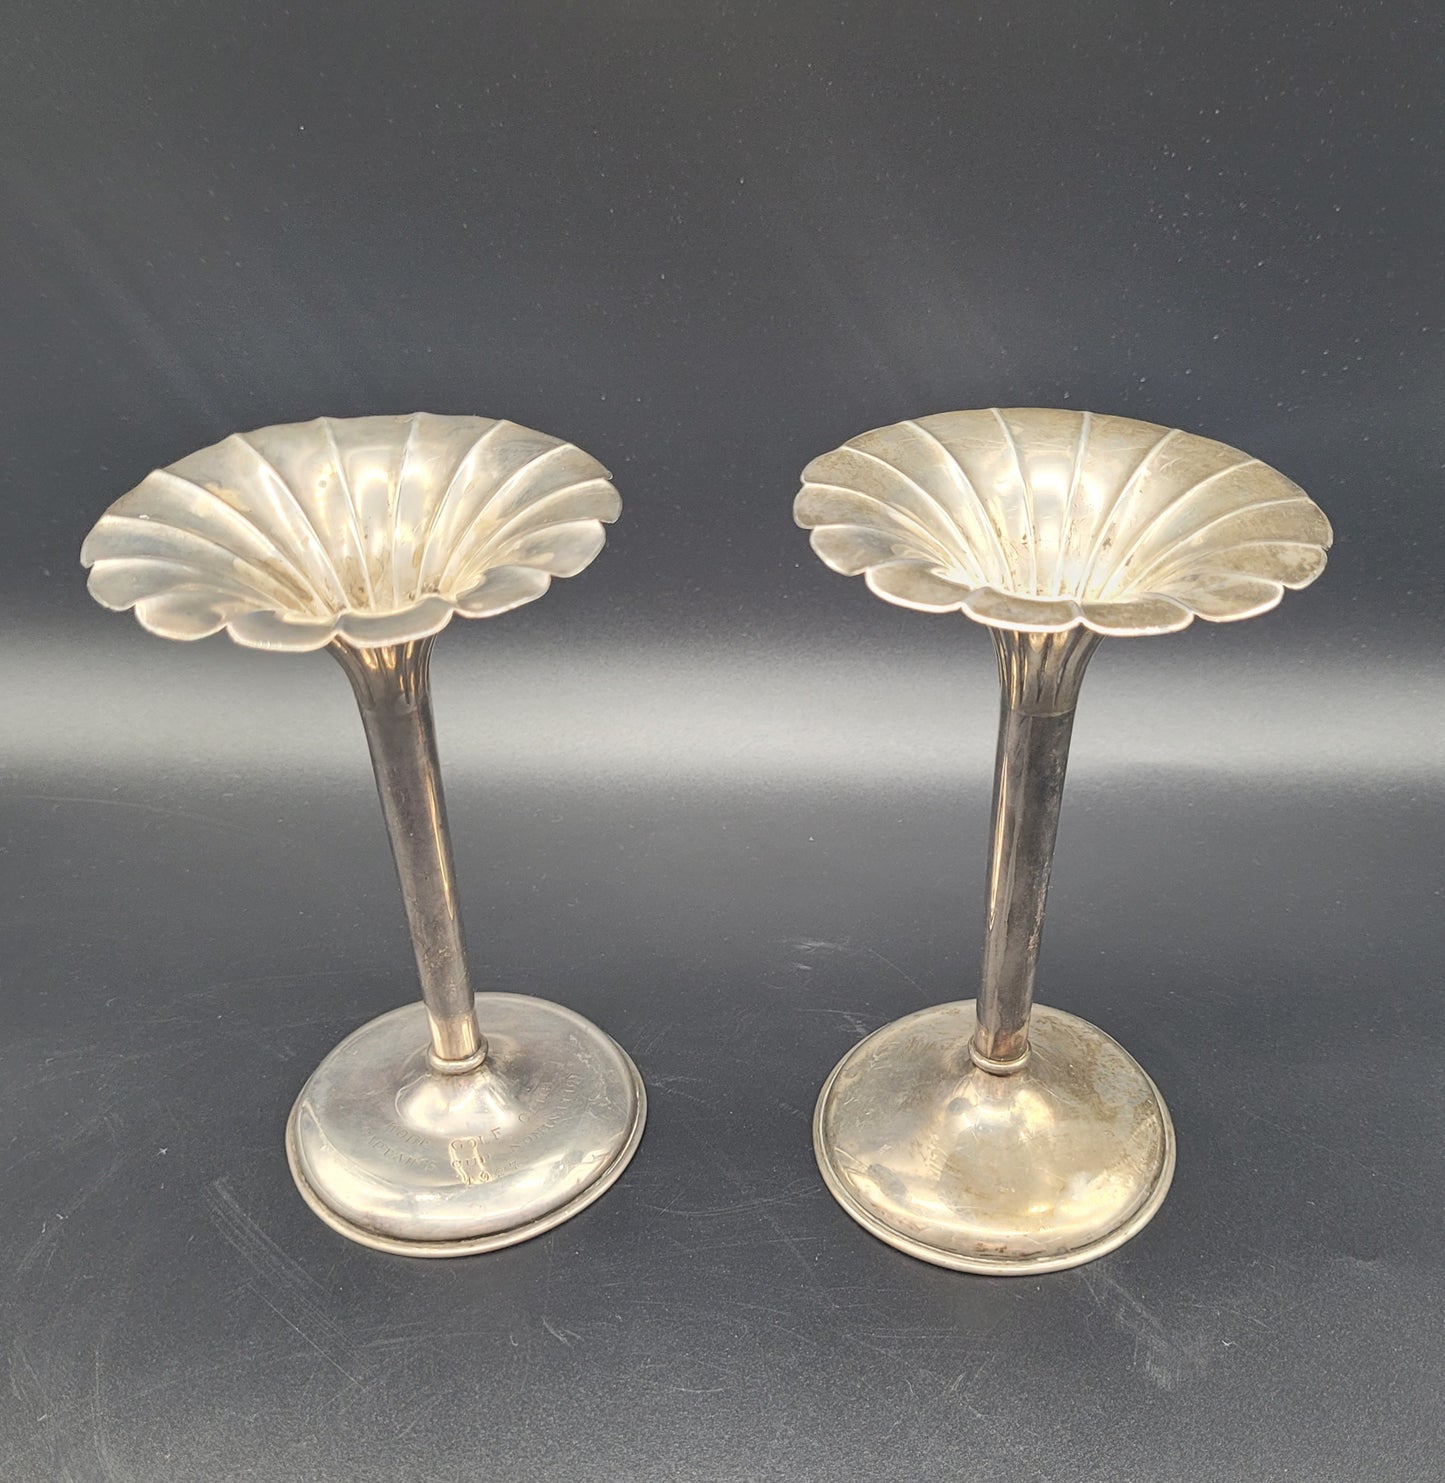 A very nice pair of sterling silver tulip posy vases, each set with fanned rims and graduated bases. With an inscription relating to a golfing competition. 